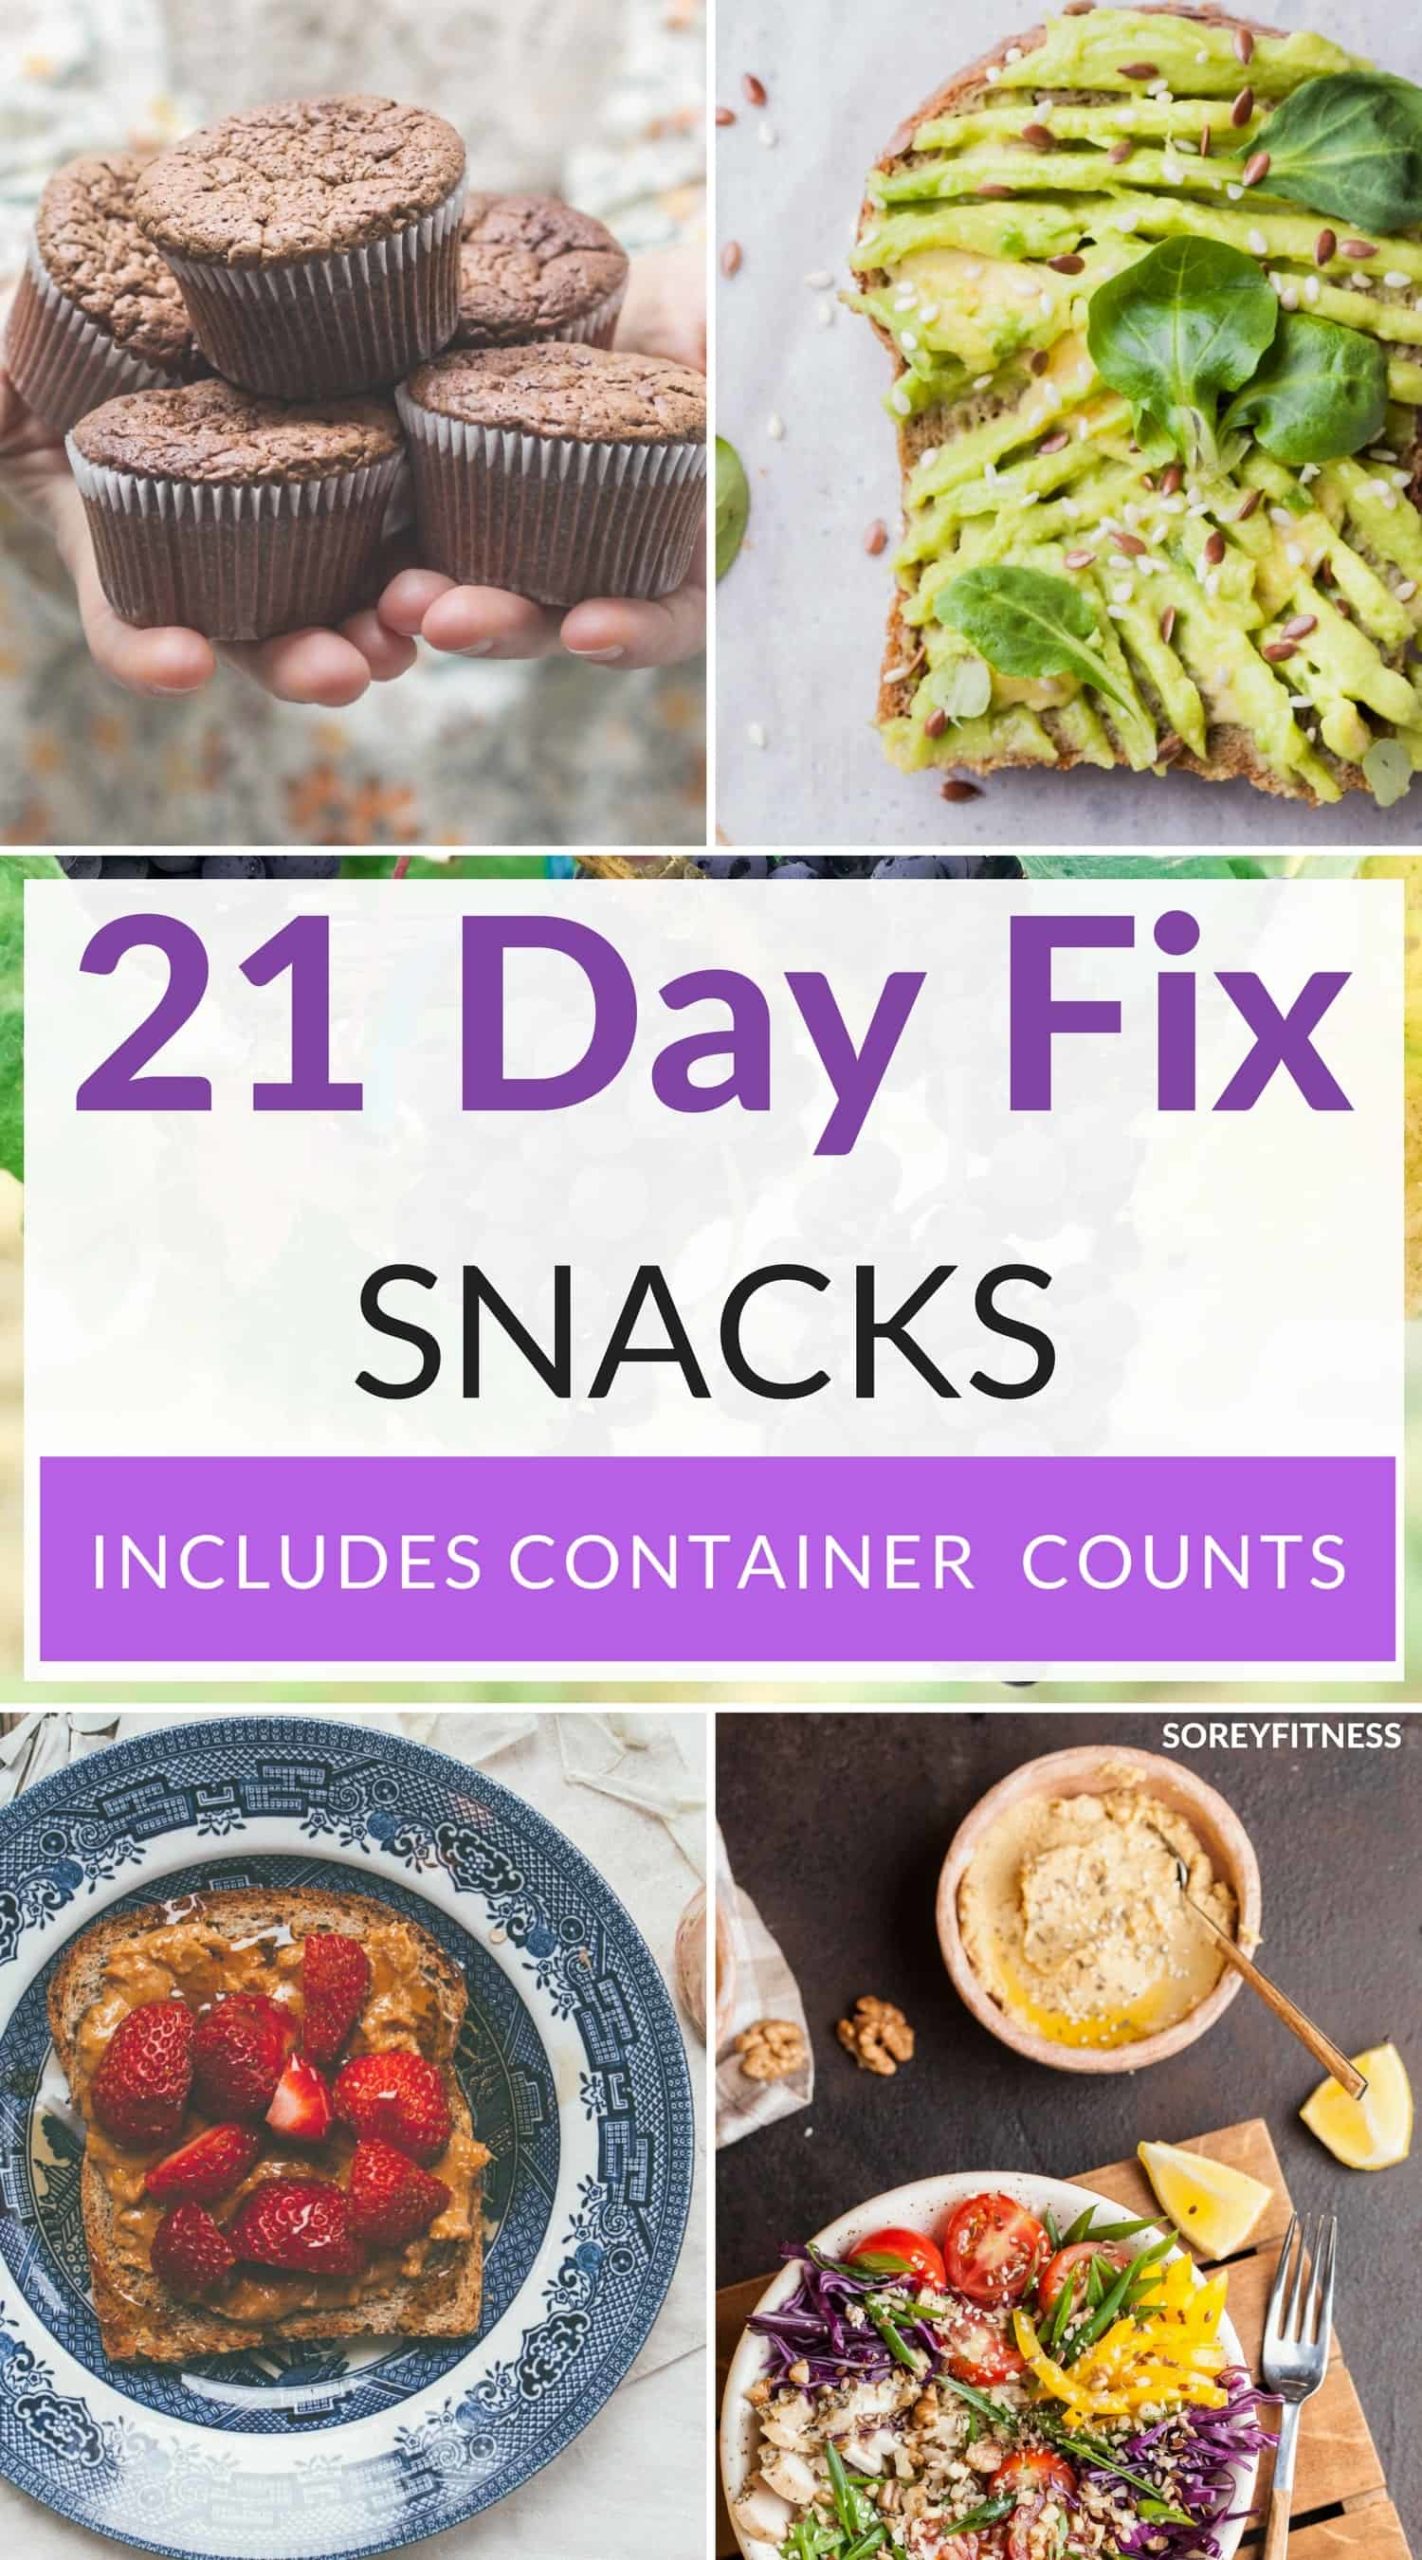 https://soreyfitness.com/wp-content/uploads/2017/04/21-day-fix-snacks-with-container-counts-min-scaled.jpg